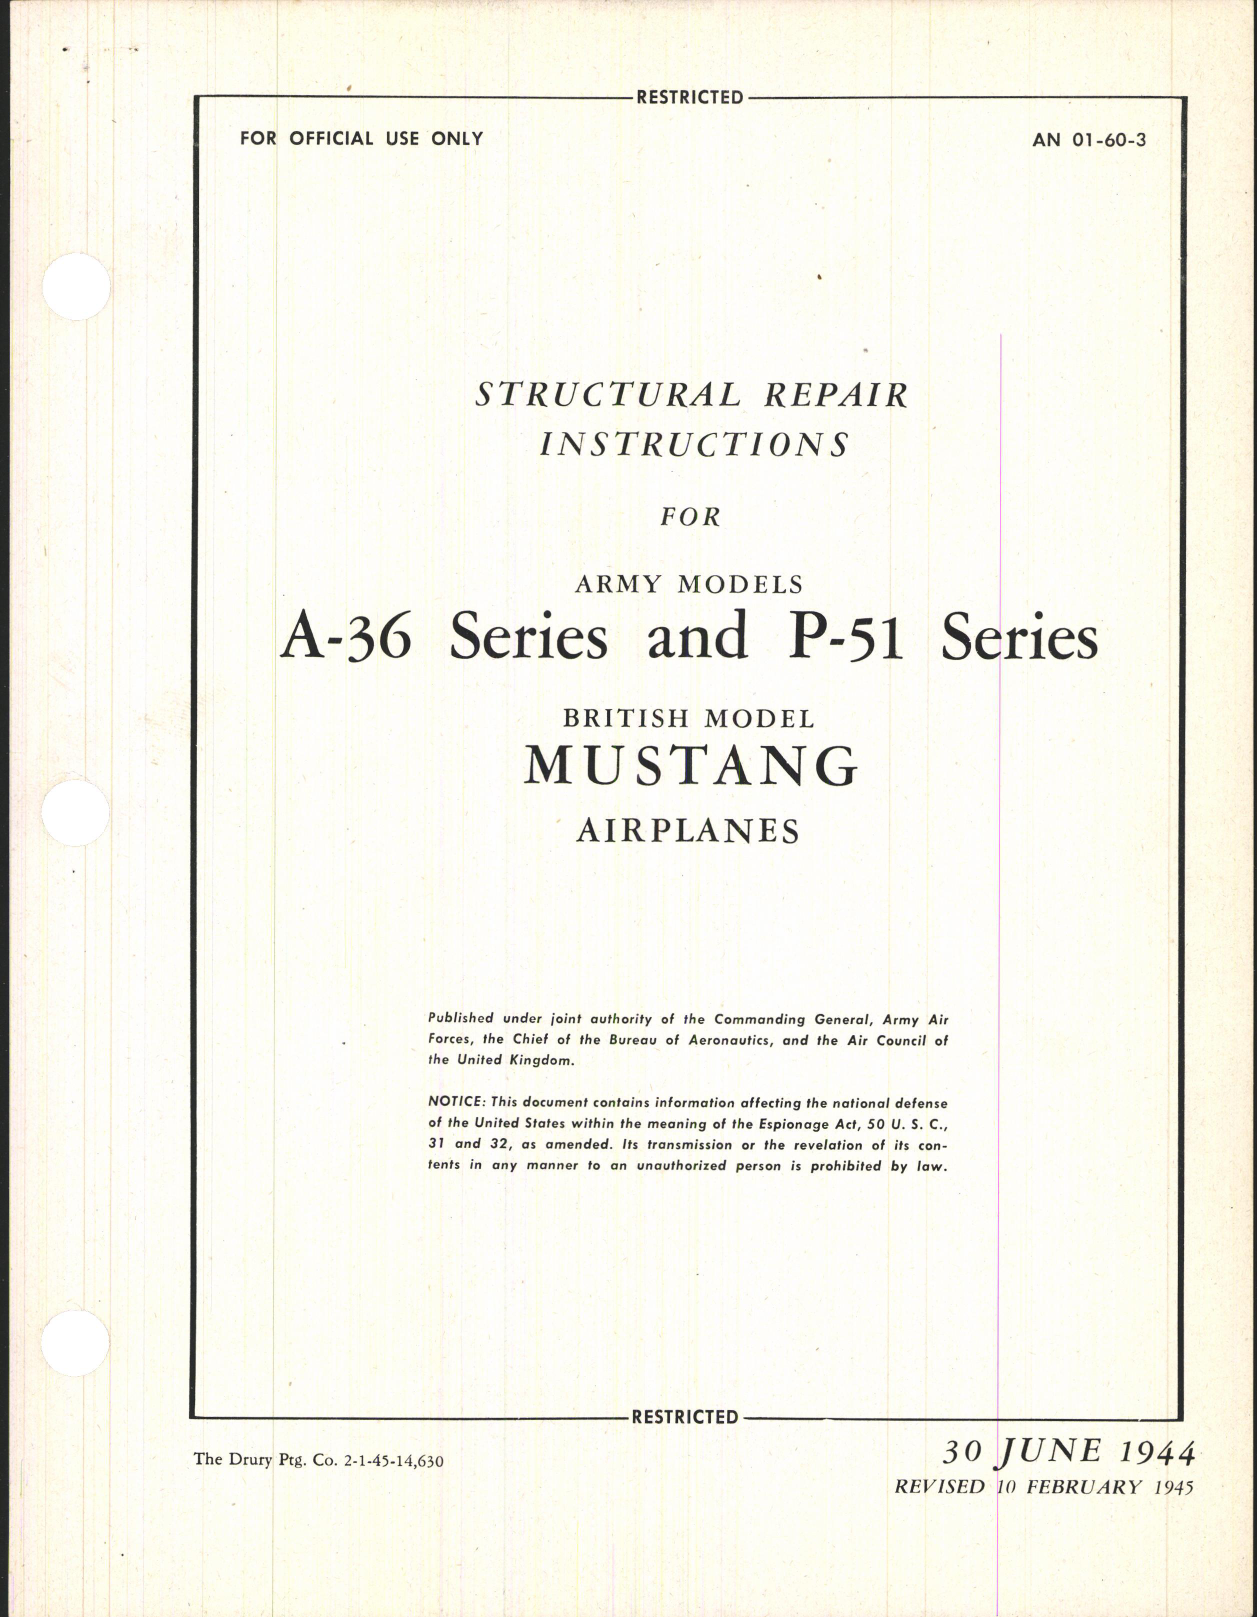 Sample page 5 from AirCorps Library document: Structural Repair Instructions for A-36 Series and P-51 Series